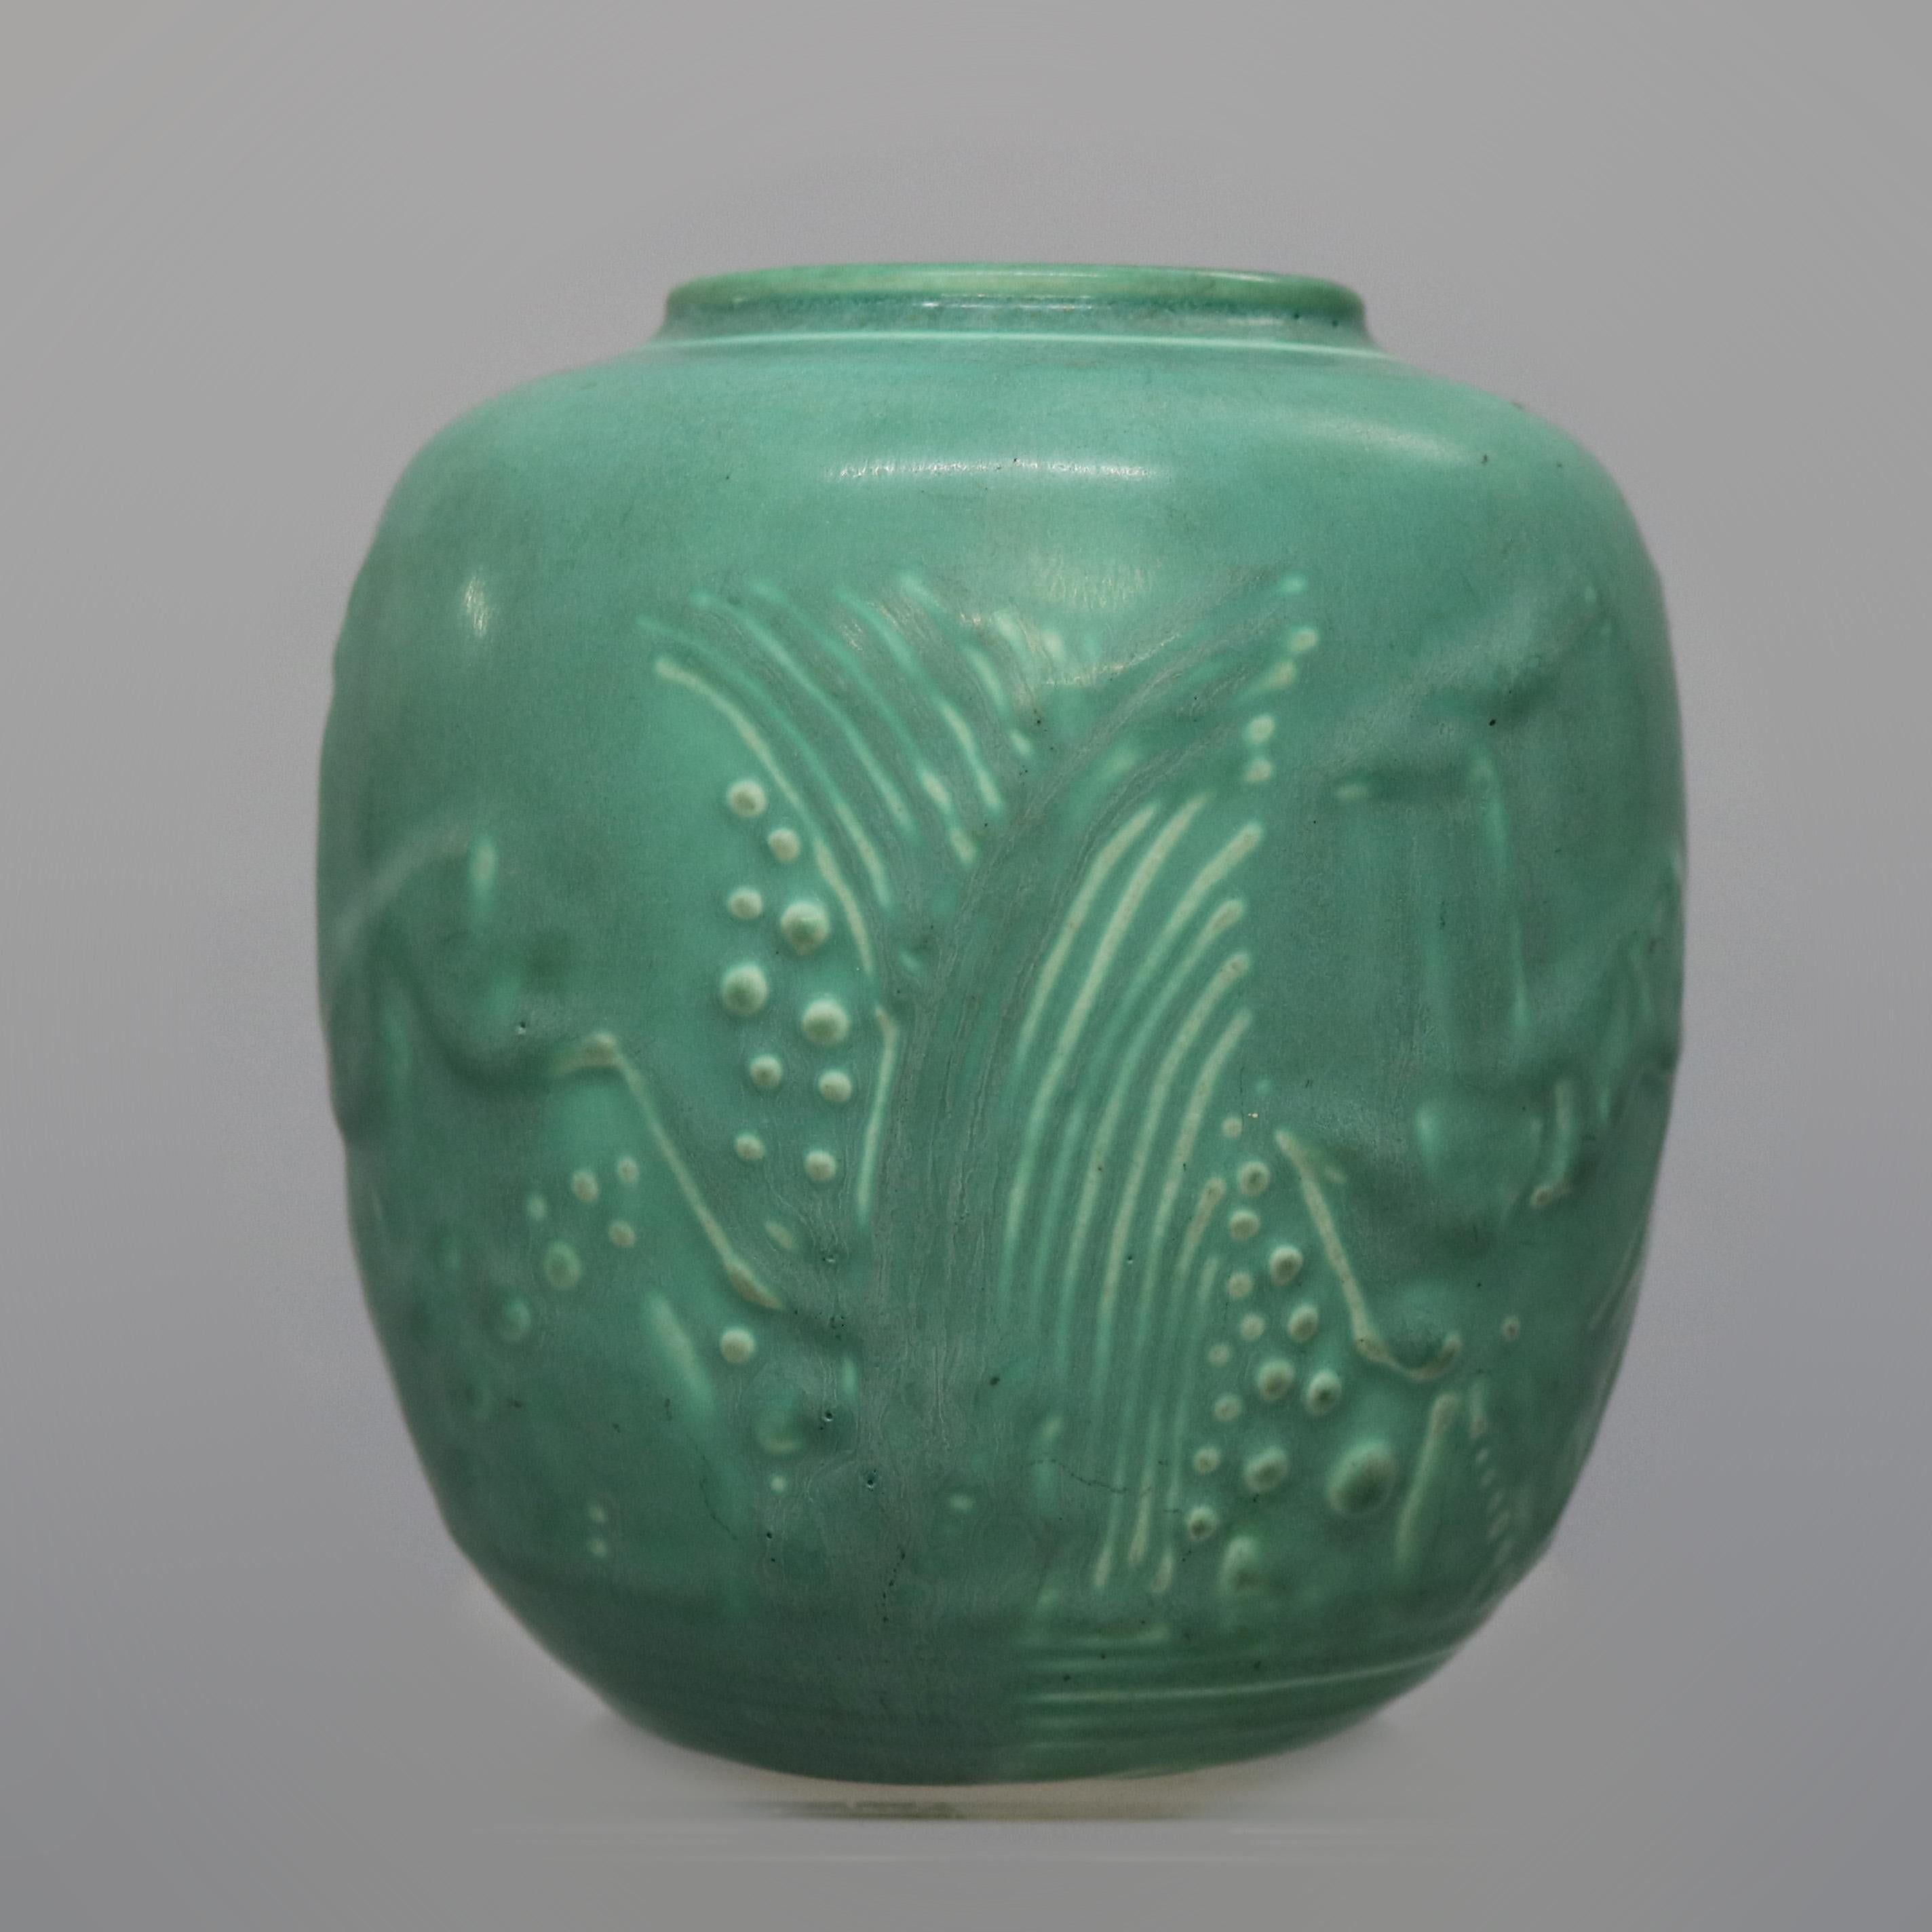 An antique Art Deco Vase by Rookwood offers art pottery with stylized landscape scene with leaping deer, signed on base as photographed, dated 1932

Measures: 4.5